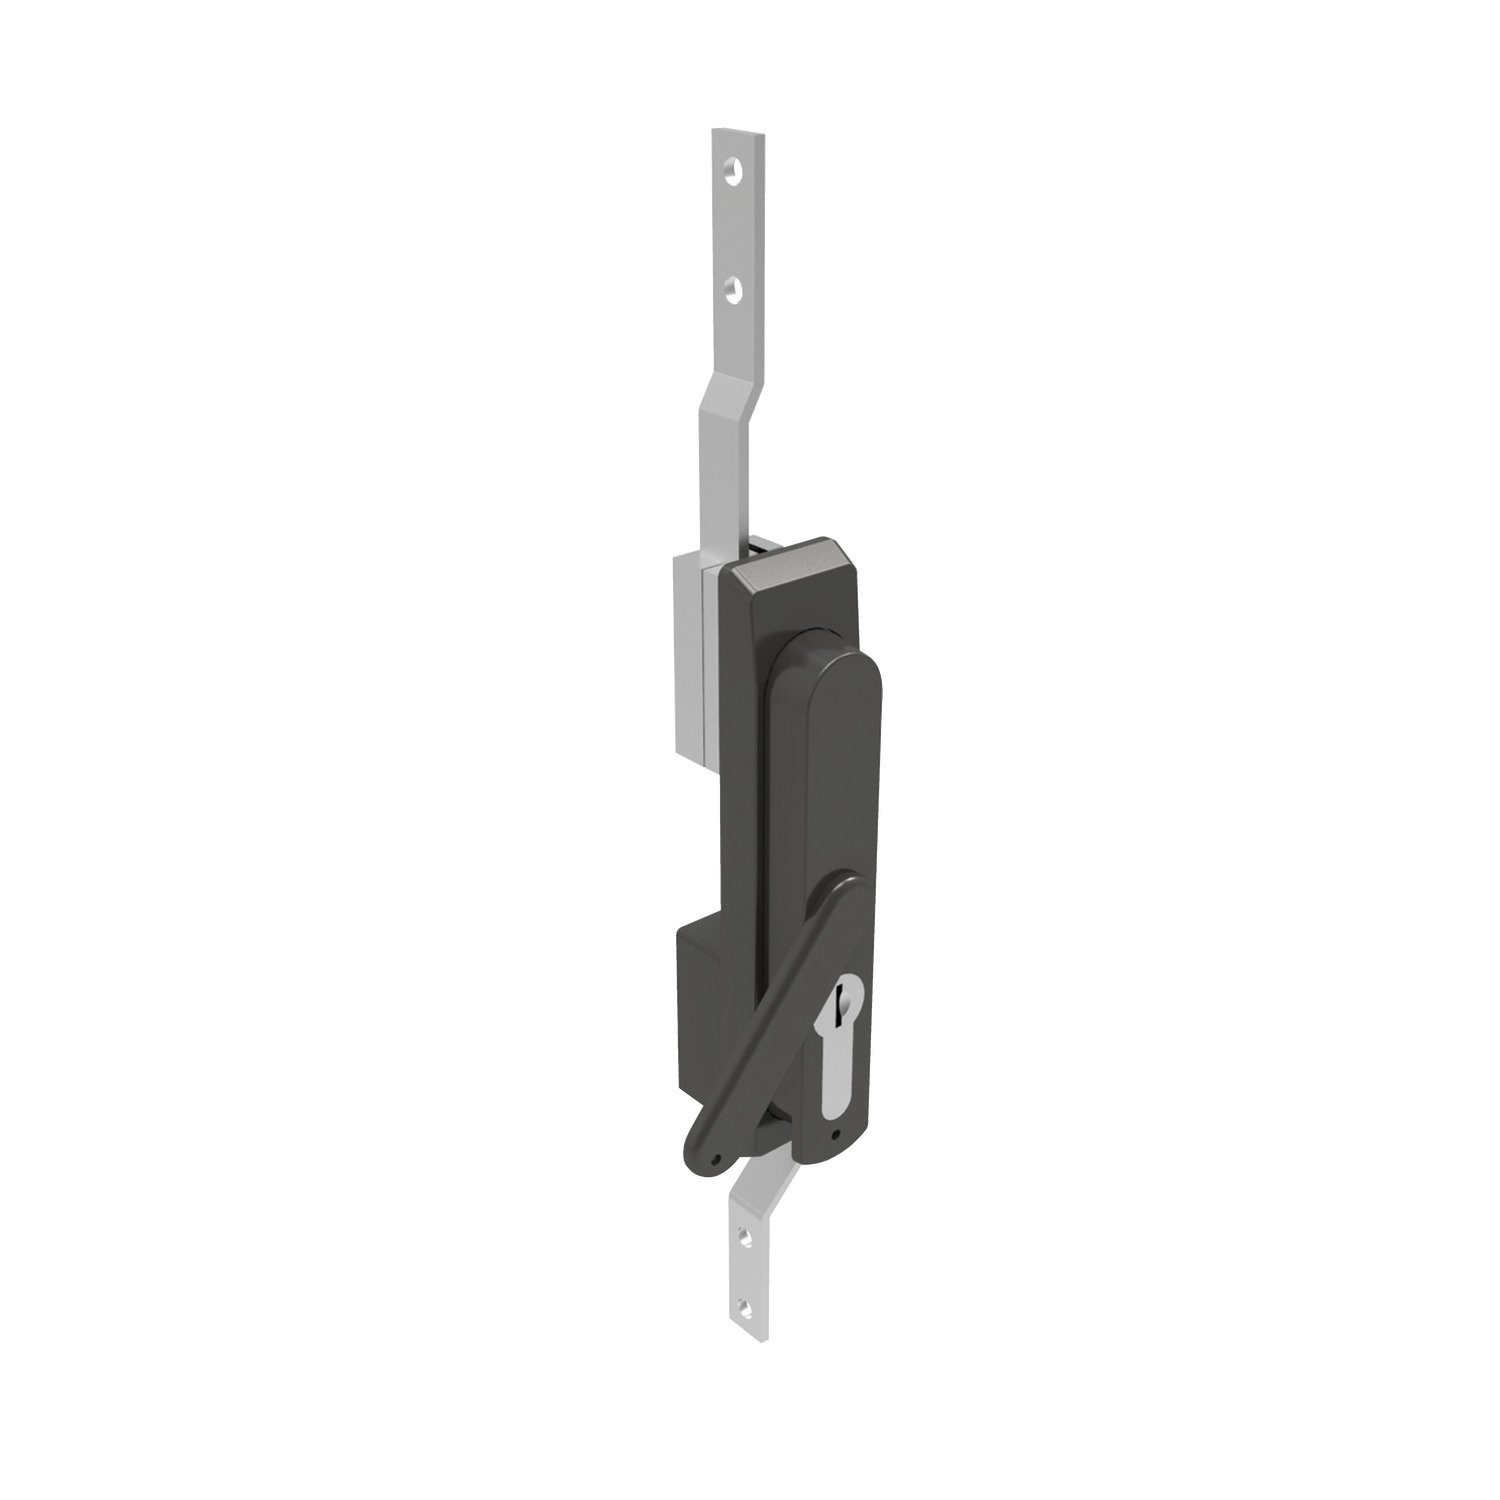 B2082 Swing Handles - with Rod Control